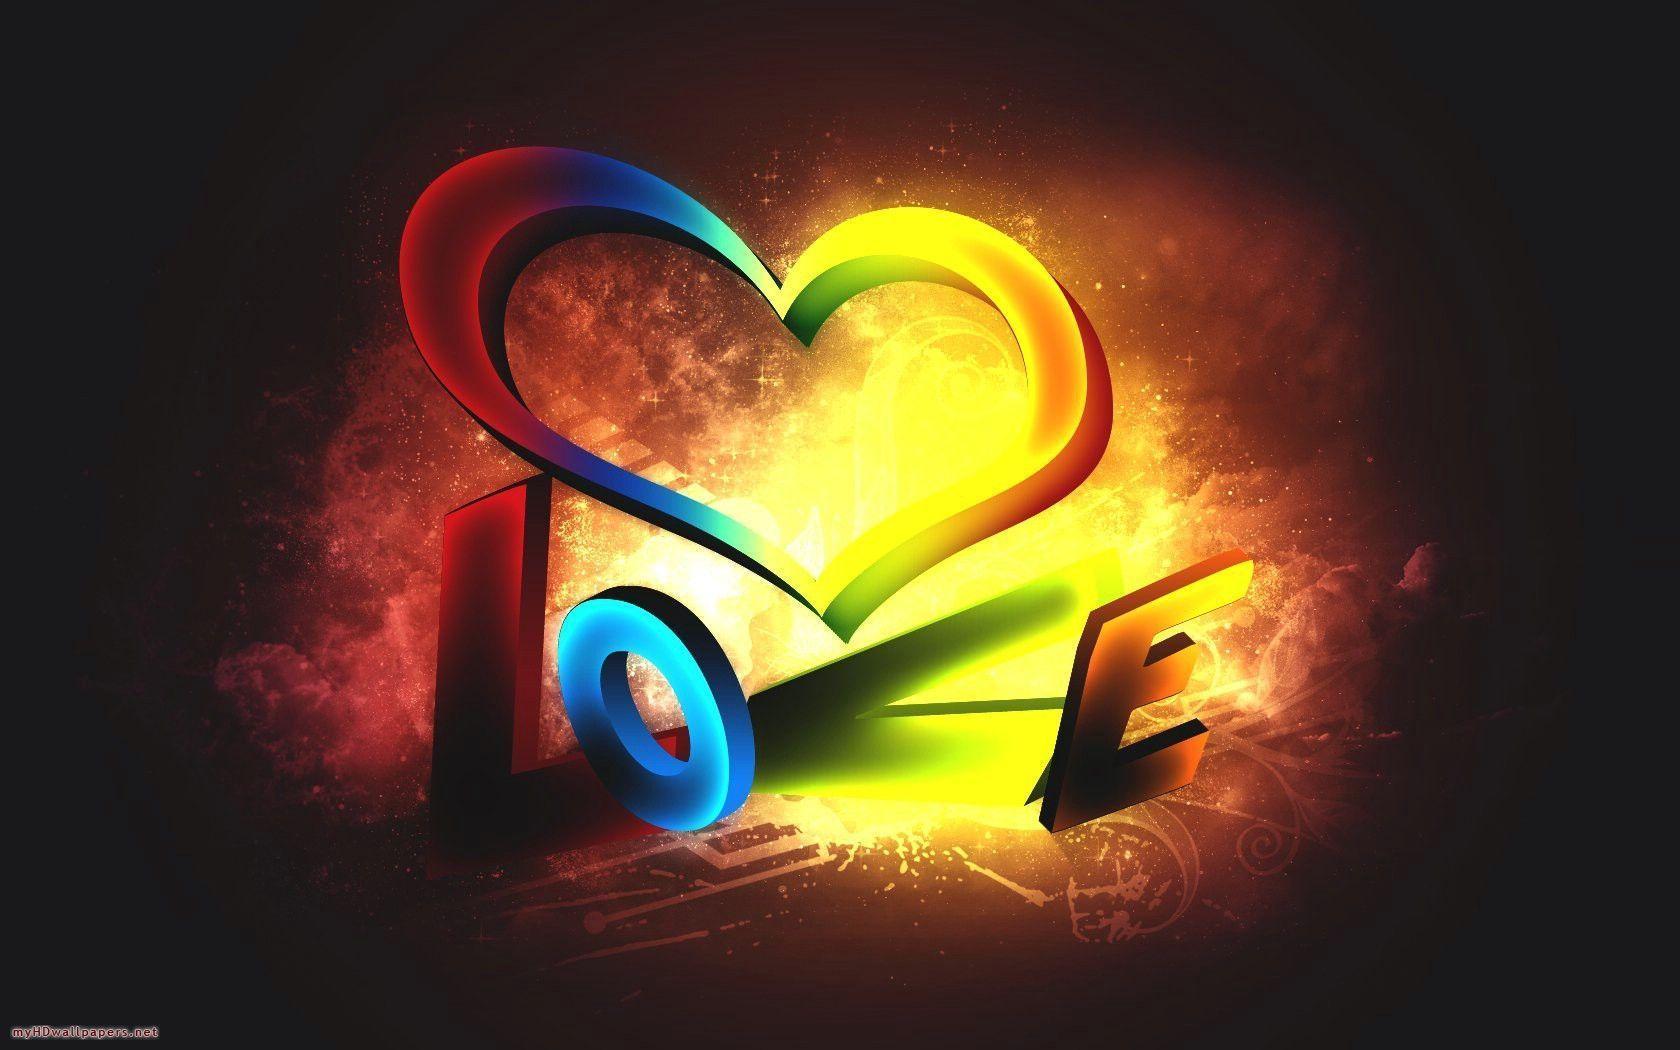 3D love wallpaper. Zem Wallpaper Is The Best Place Where You Get